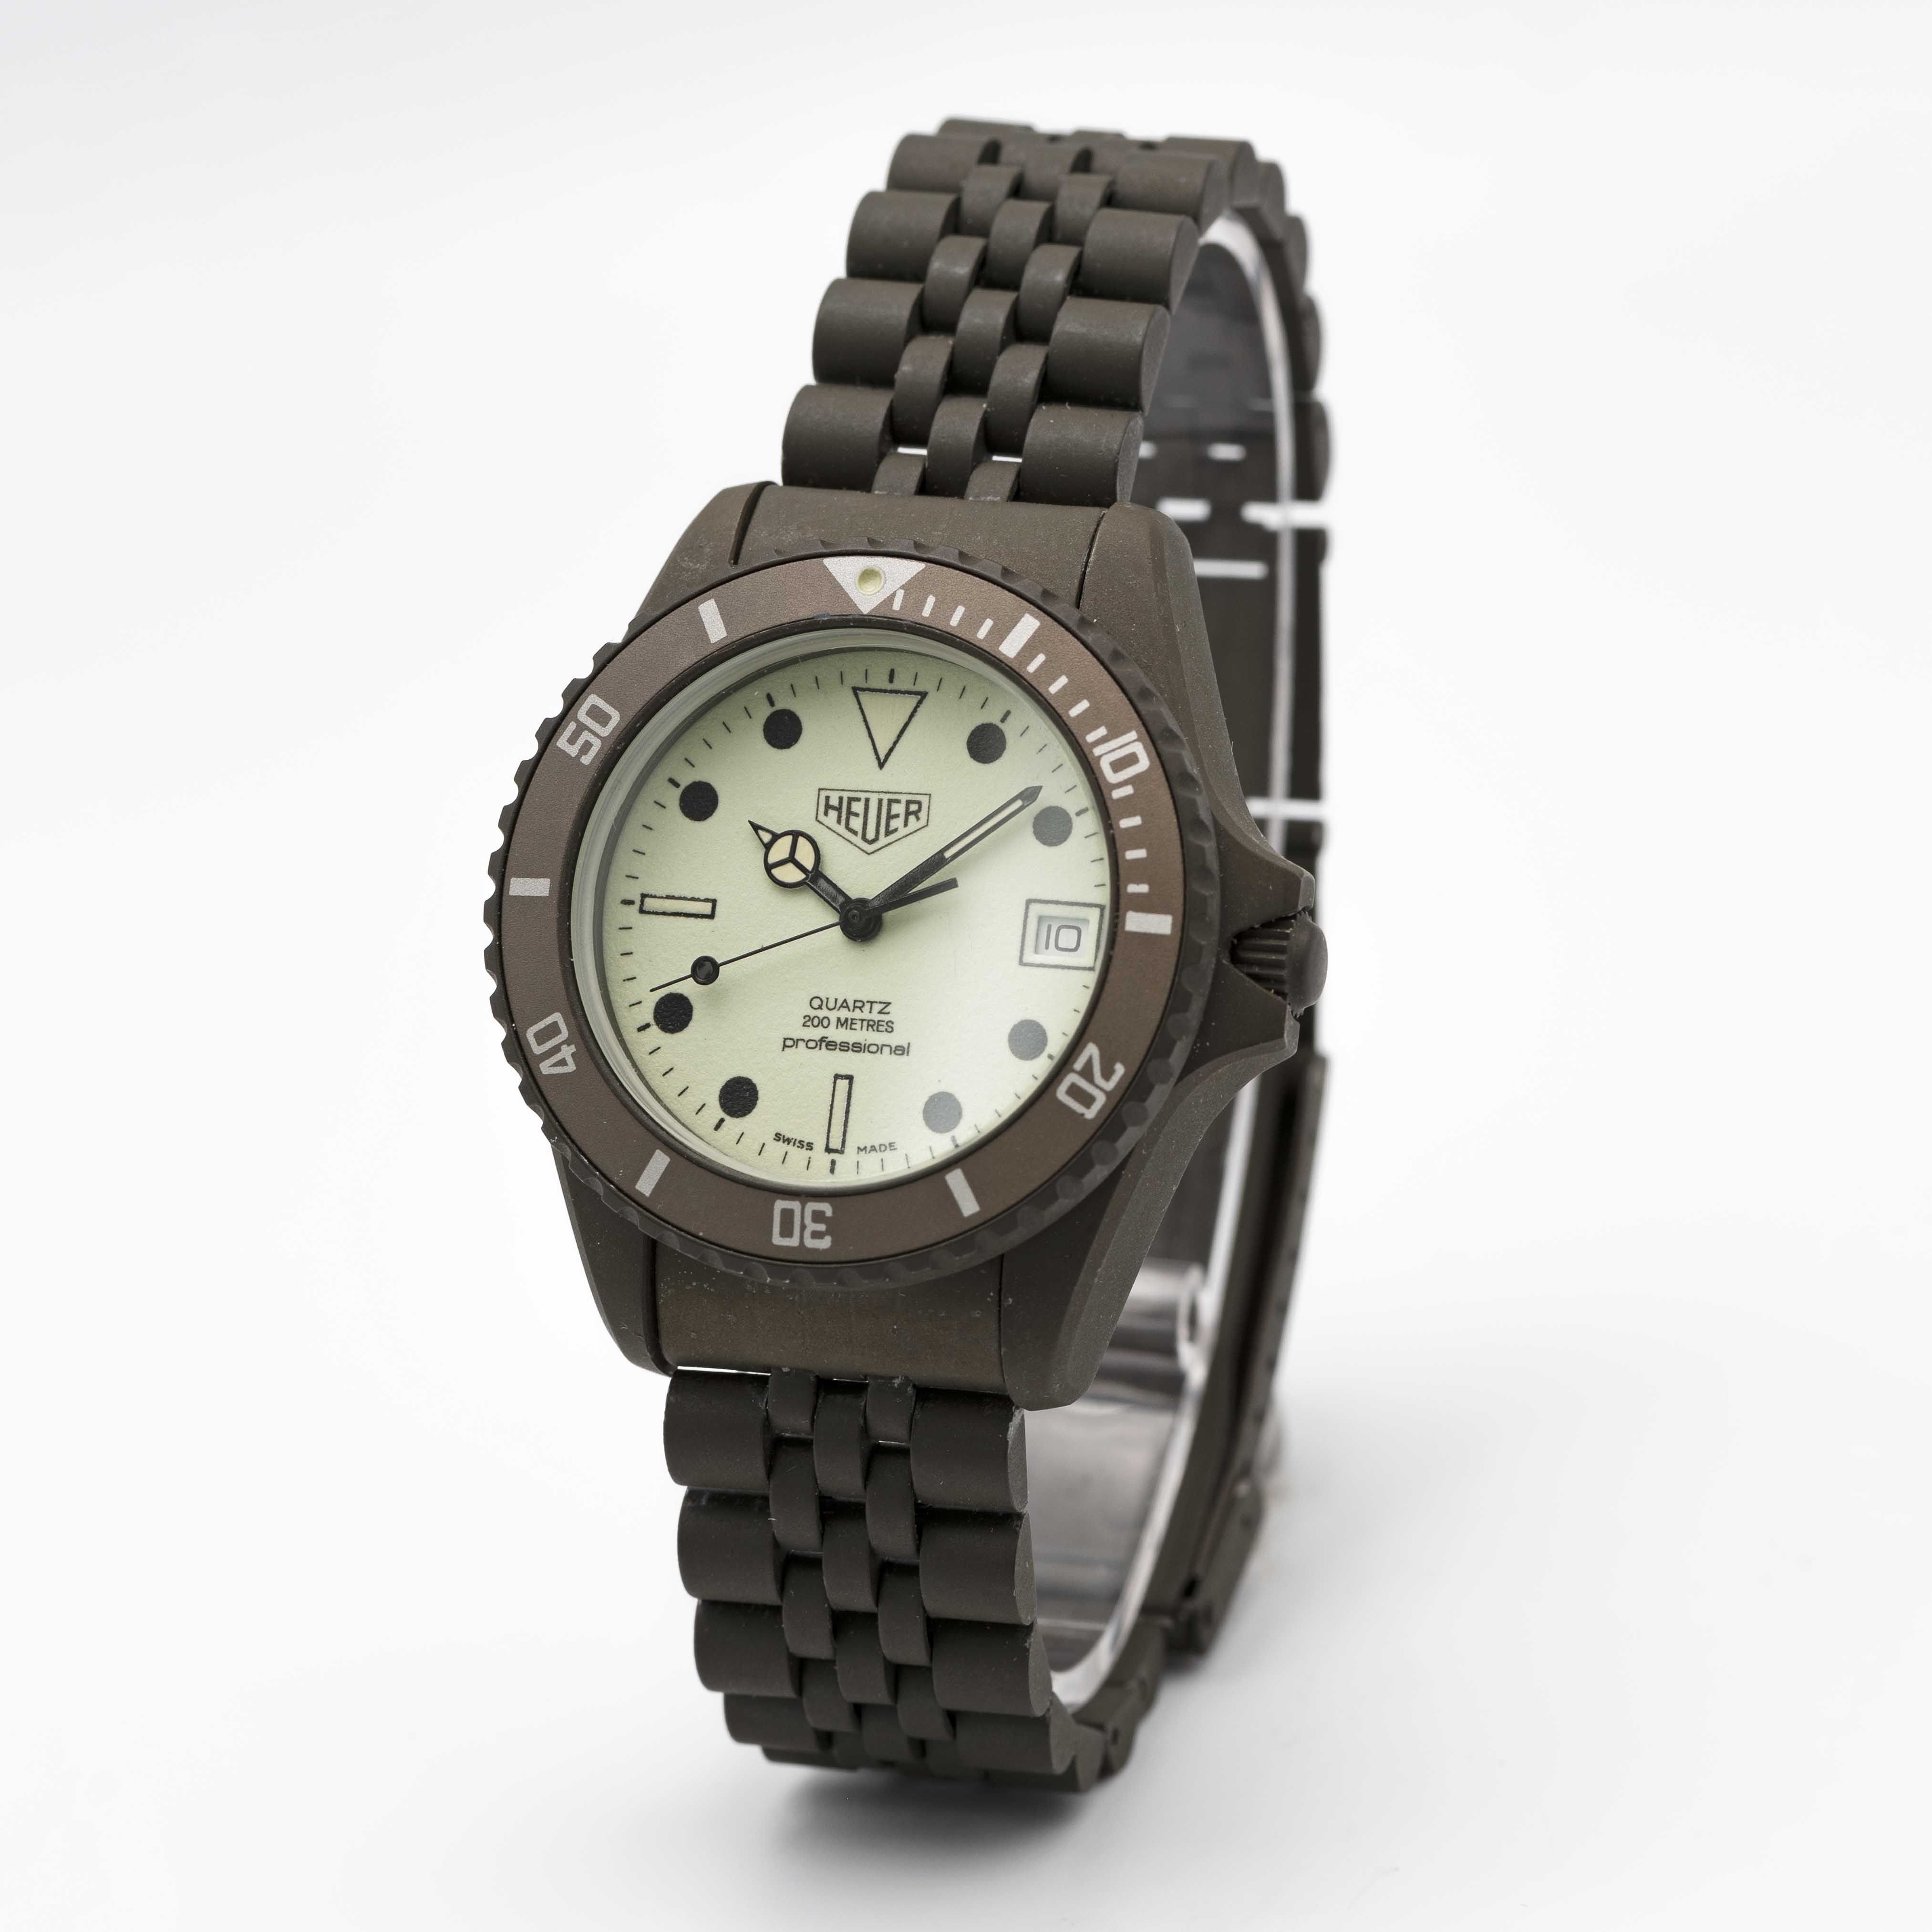 A RARE GENTLEMAN'S OLIVE GREEN PVD COATED HEUER PROFESSIONEL 200 METRES NIGHT DIVER "MILITARY" - Image 3 of 9